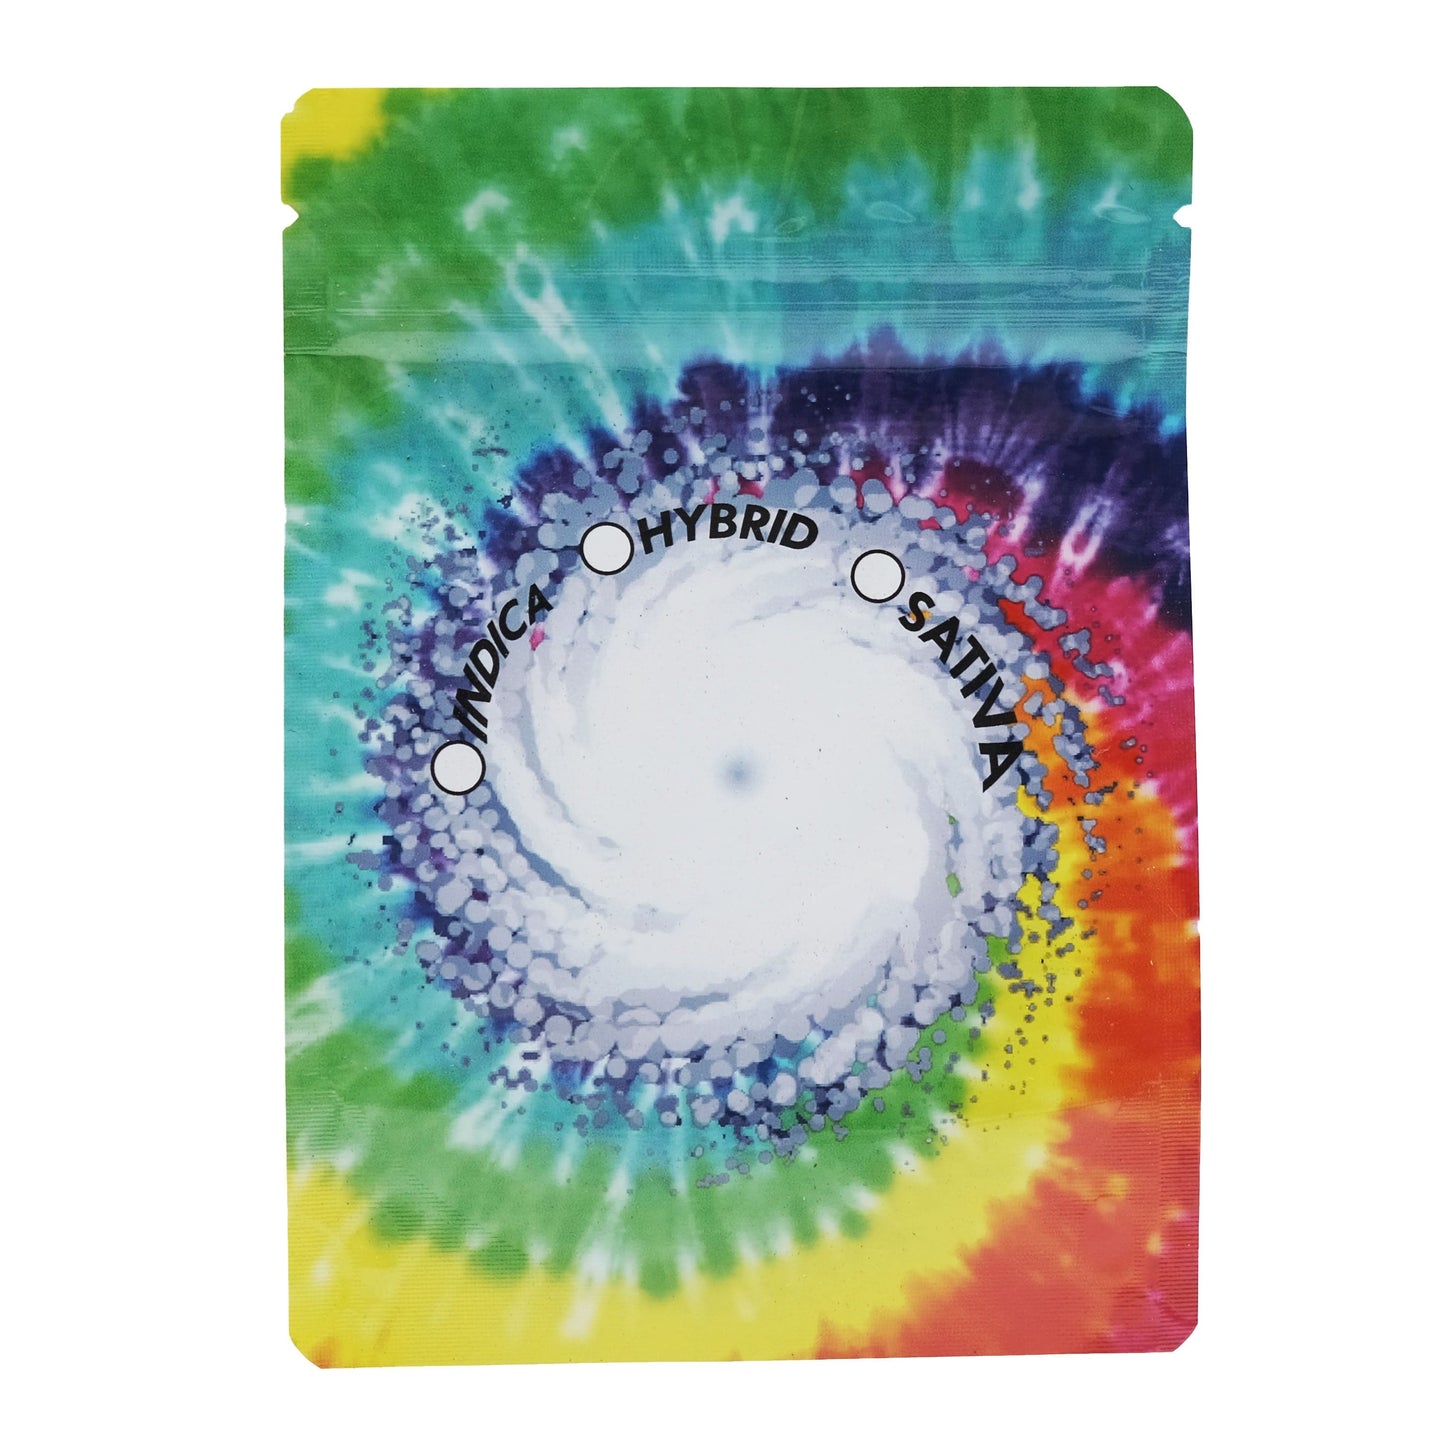 10-Pack Tie Dye Smell Proof Mylar Bag | 1/8th ounce to 1/4th ounce